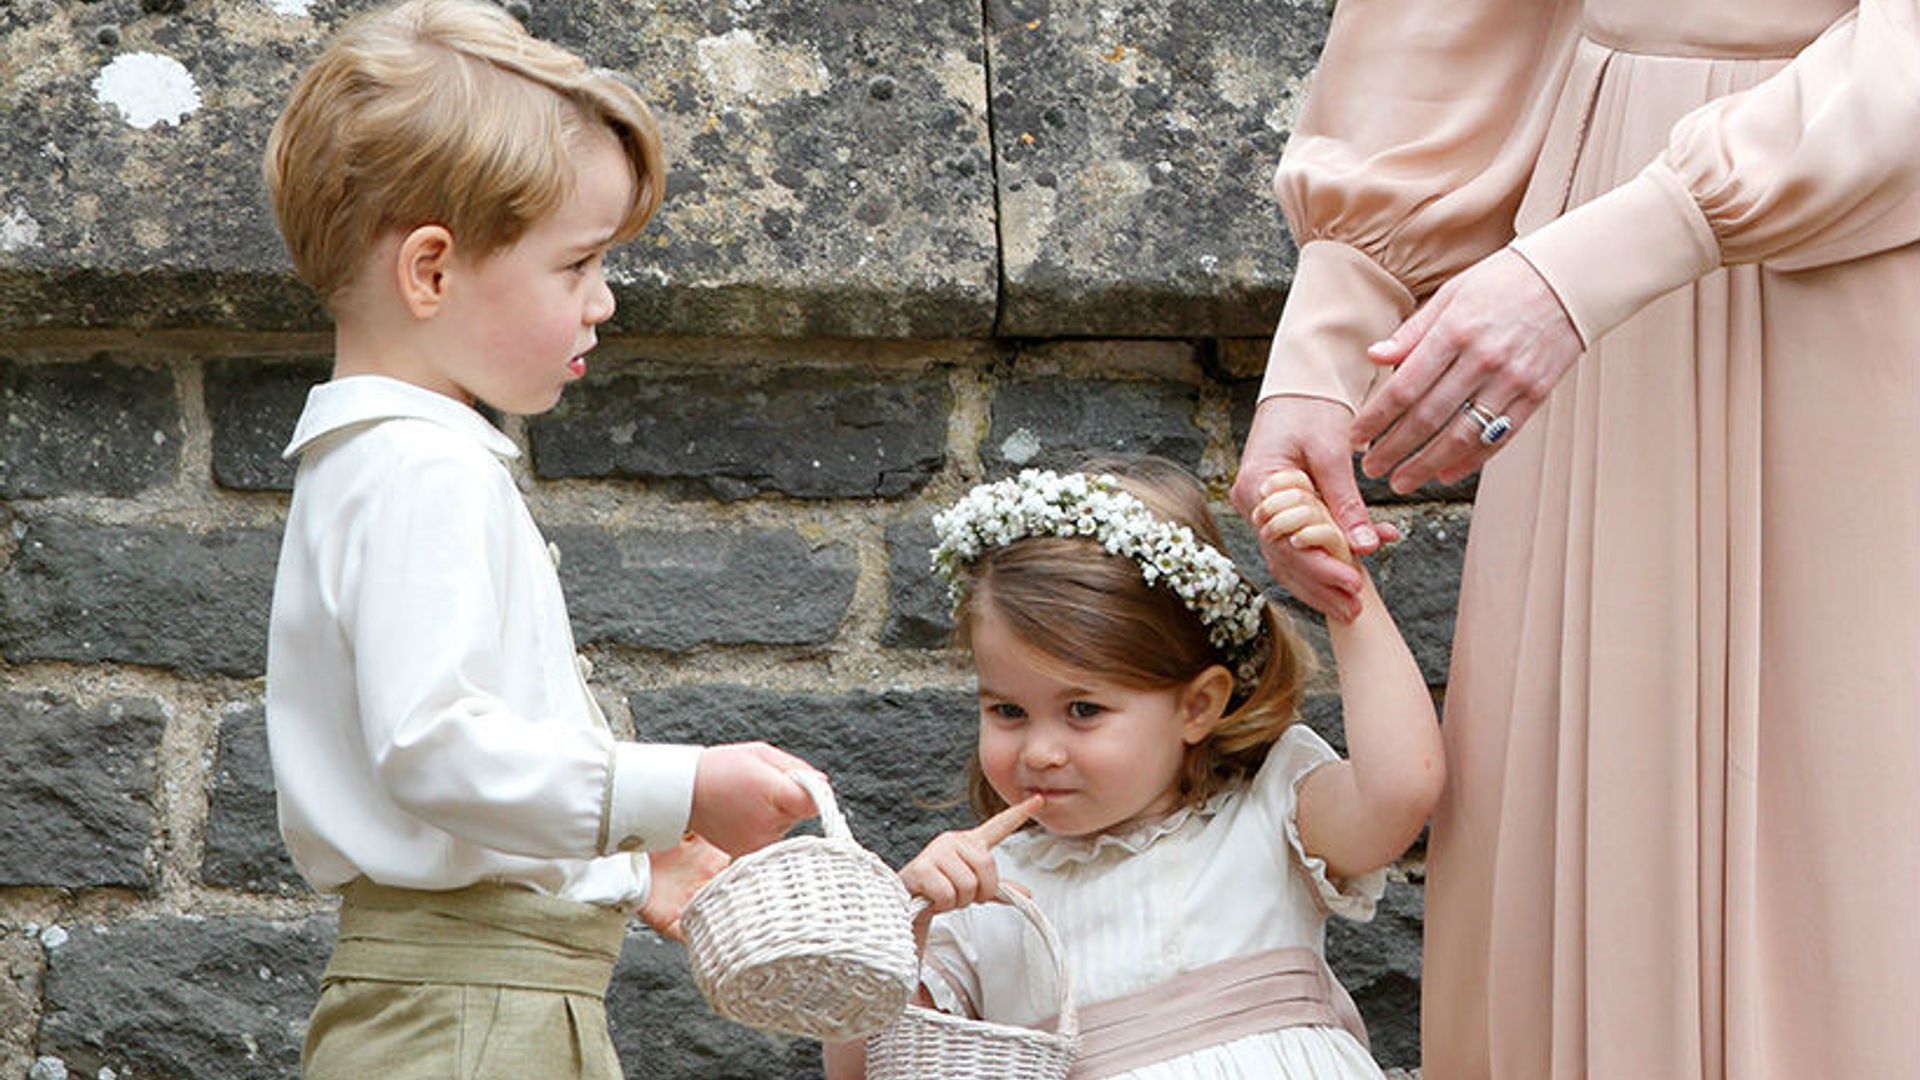 Prince George and Princess Charlotte play starring roles at Kate Middleton's friend's wedding